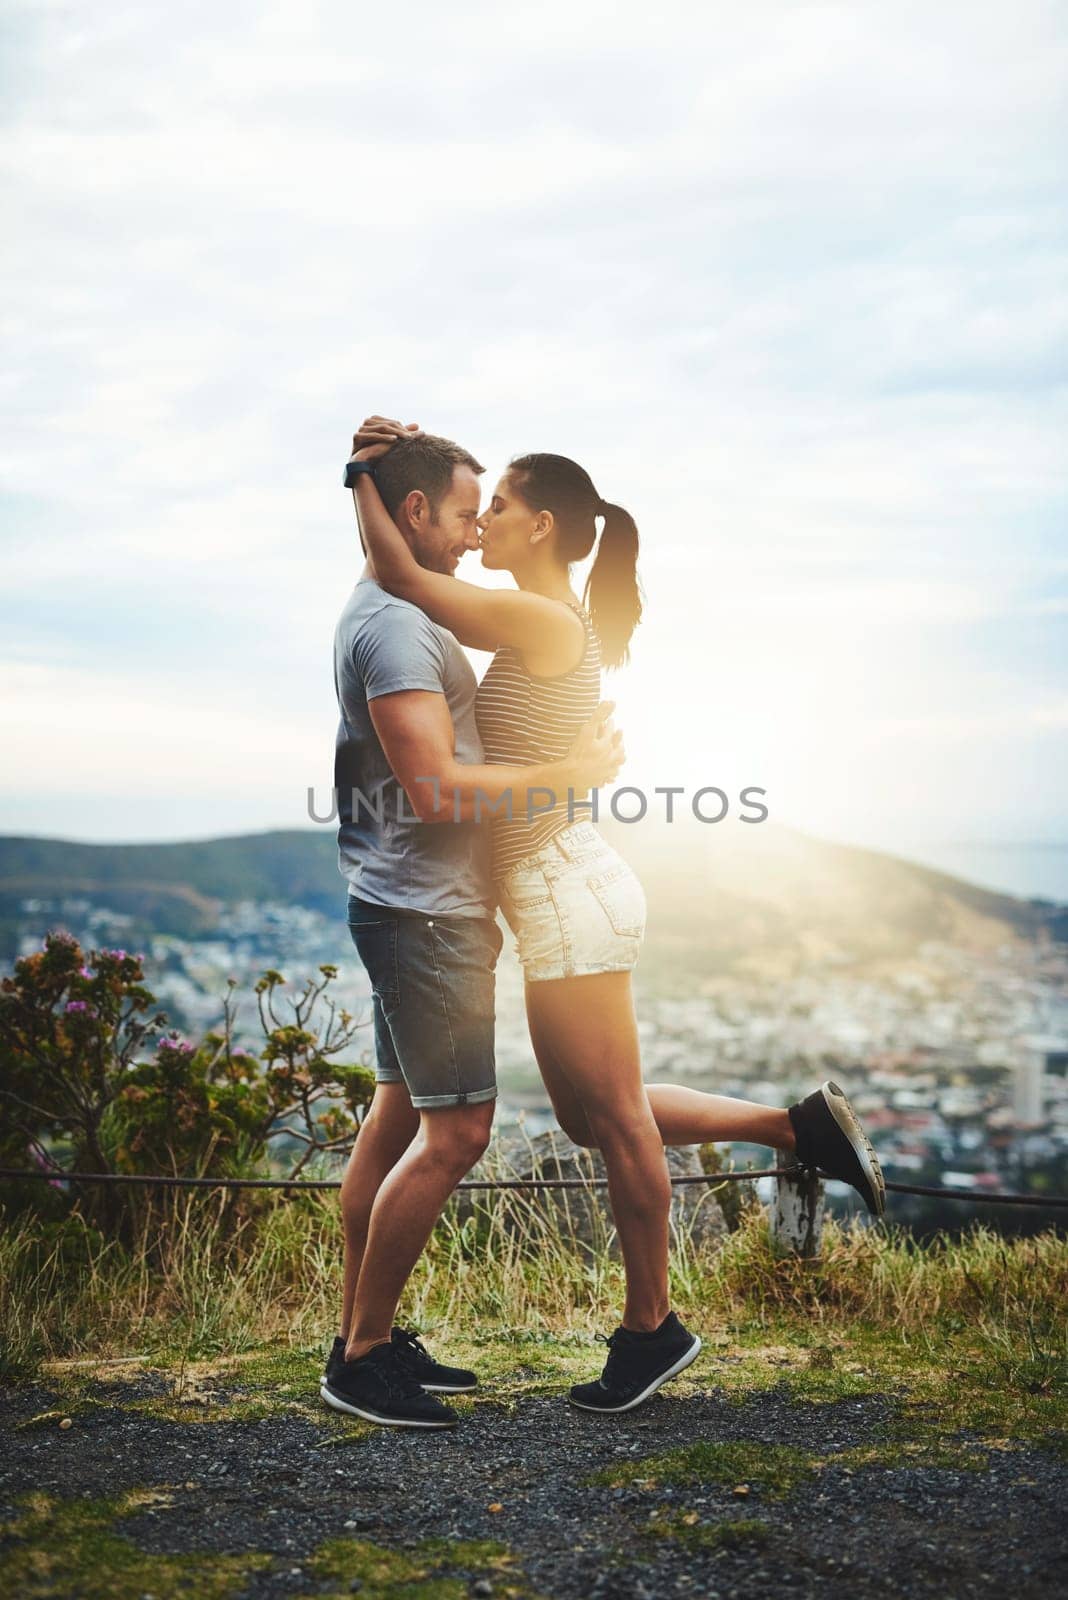 Kiss, mockup or happy couple hug in nature on outdoor date for love with support, loyalty or freedom. Romantic man, affection space or woman on holiday vacation together to relax or travel in USA.